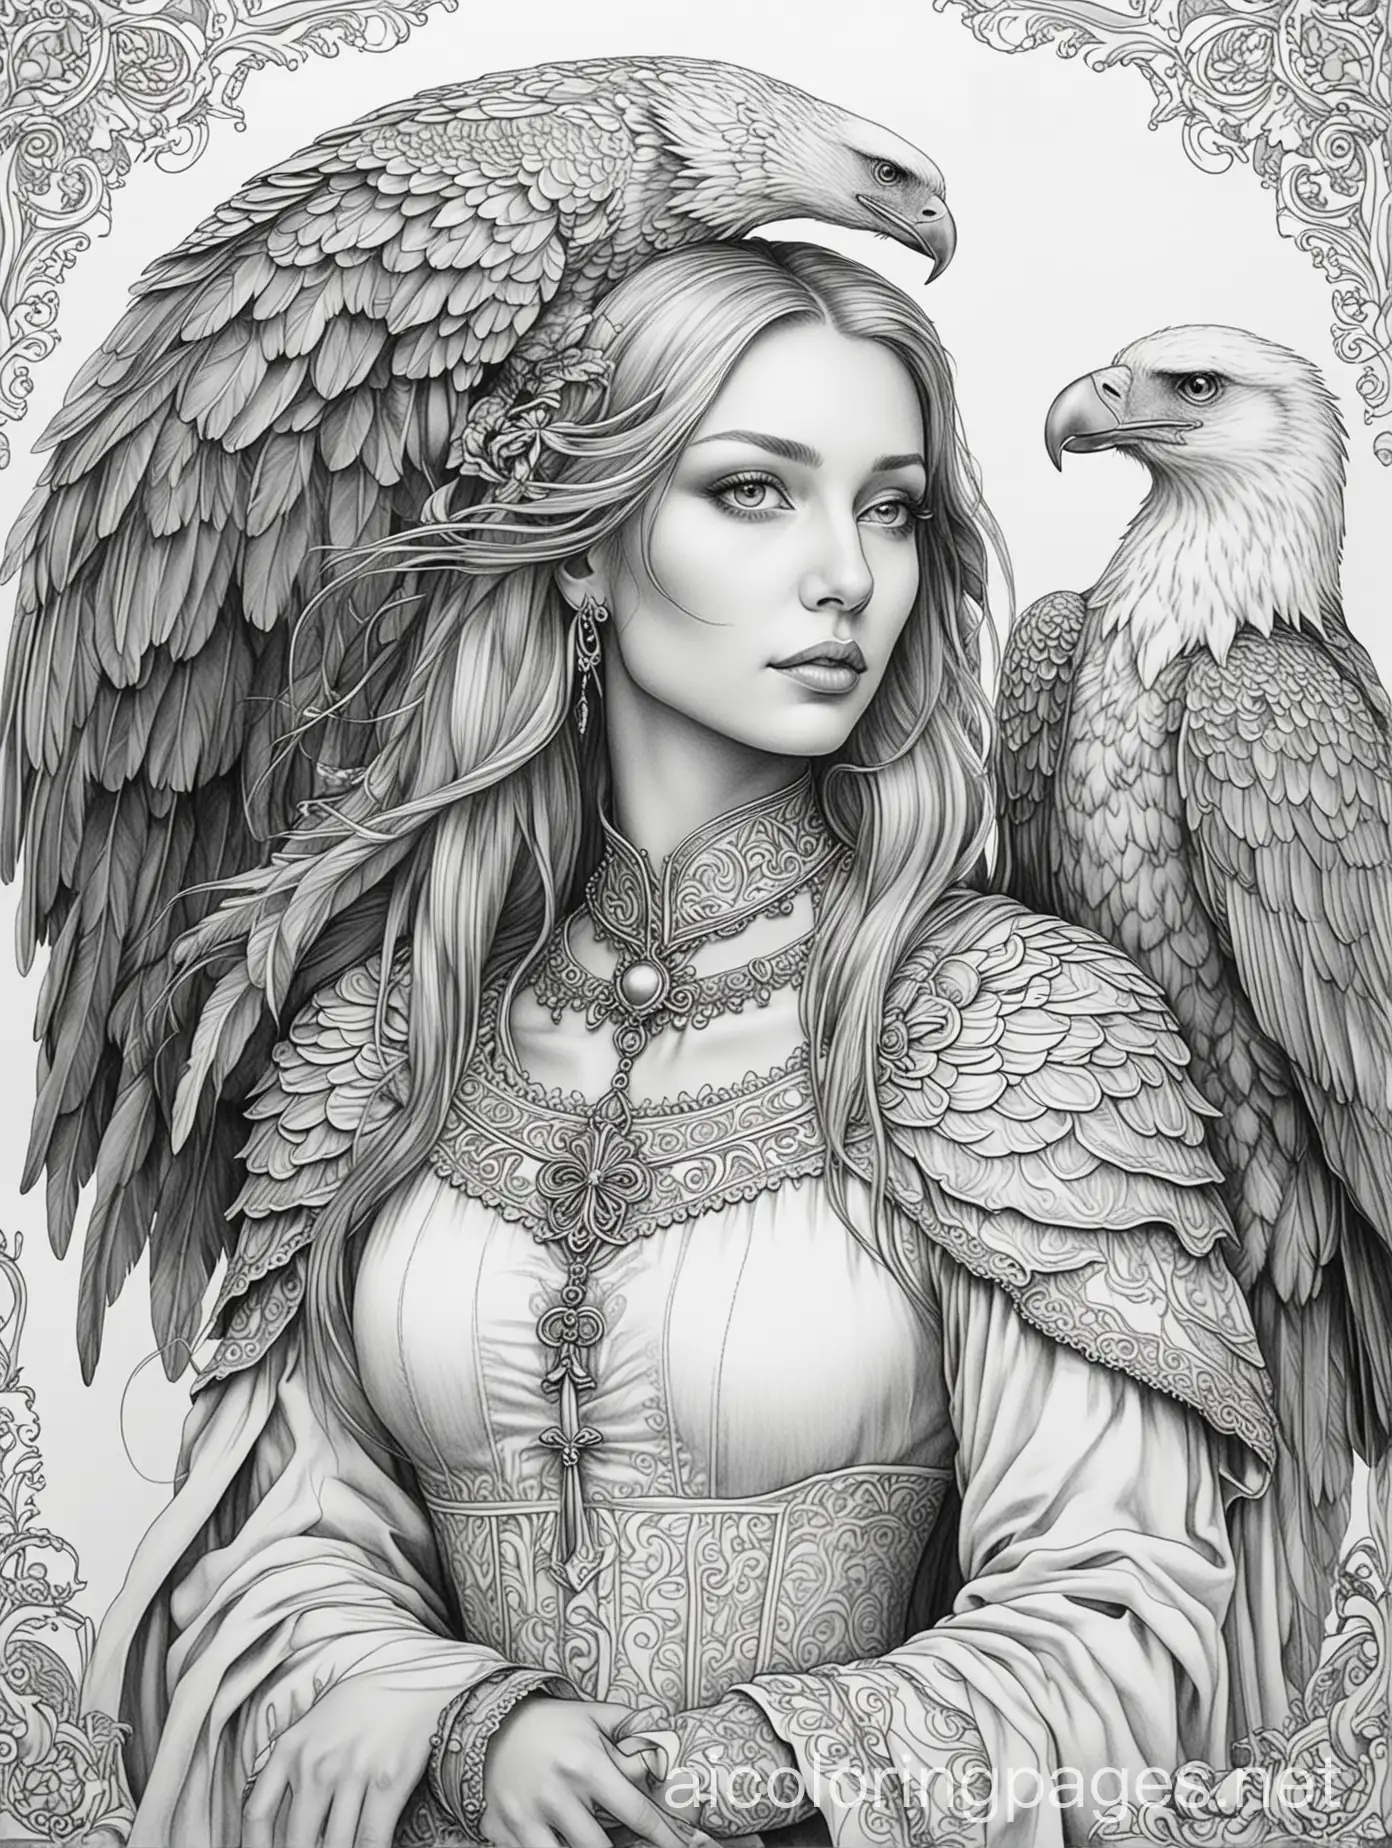 eagle and gothic lady adult colouring book , Coloring Page, black and white, line art, white background, Simplicity, Ample White Space. The background of the coloring page is plain white to make it easy for young children to color within the lines. The outlines of all the subjects are easy to distinguish, making it simple for kids to color without too much difficulty